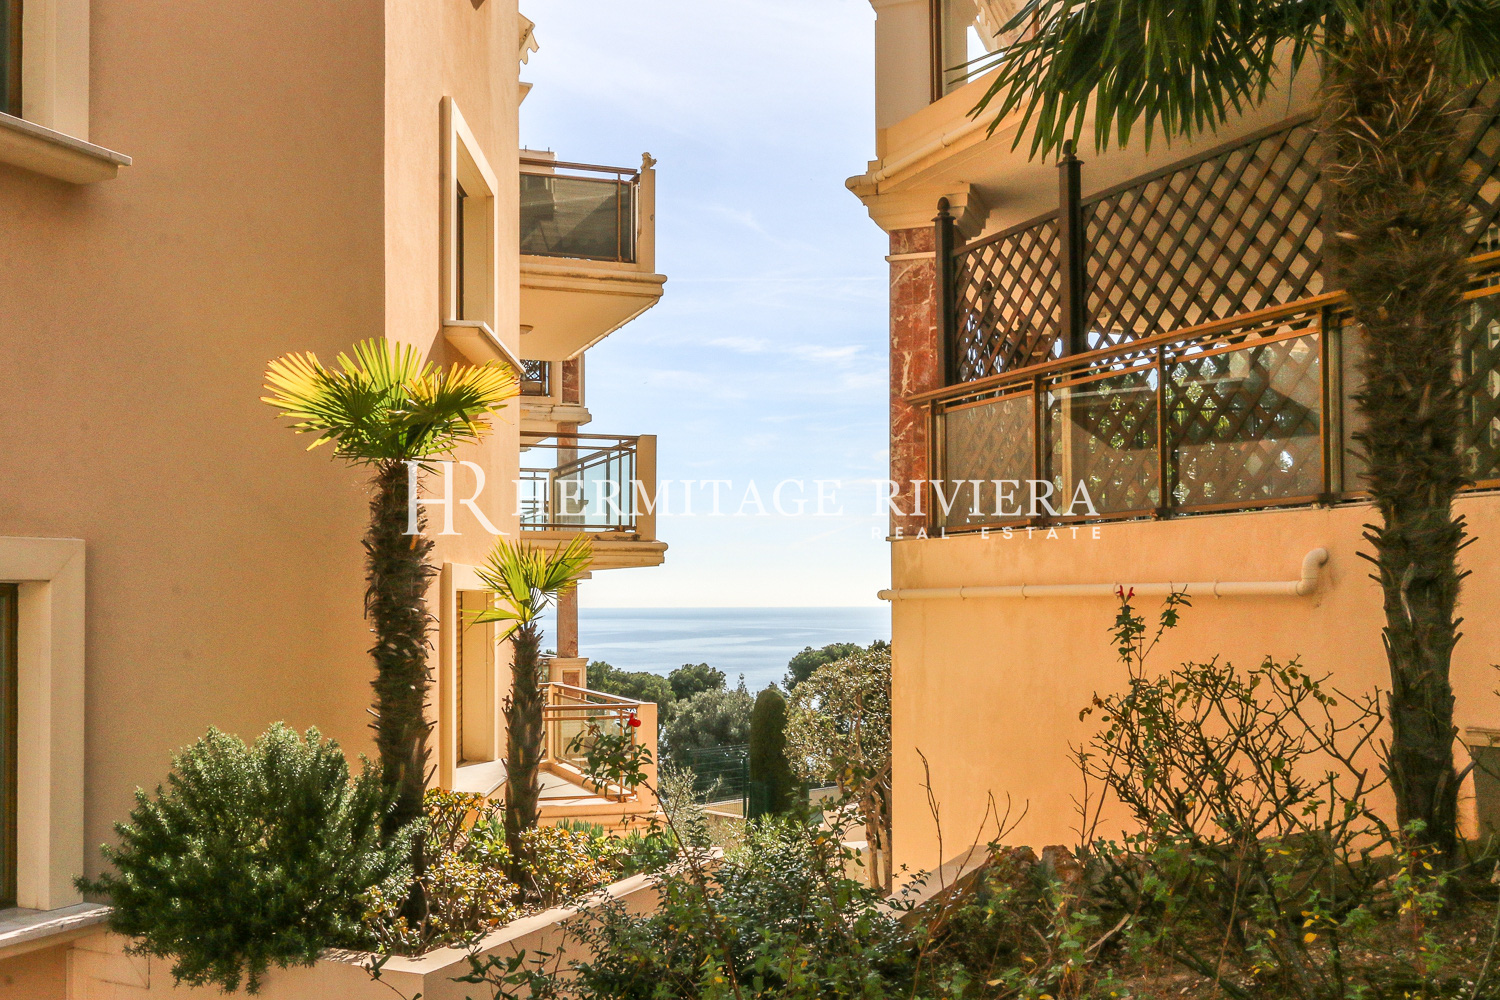 Apartment to renovate with views over Monaco (image 9)